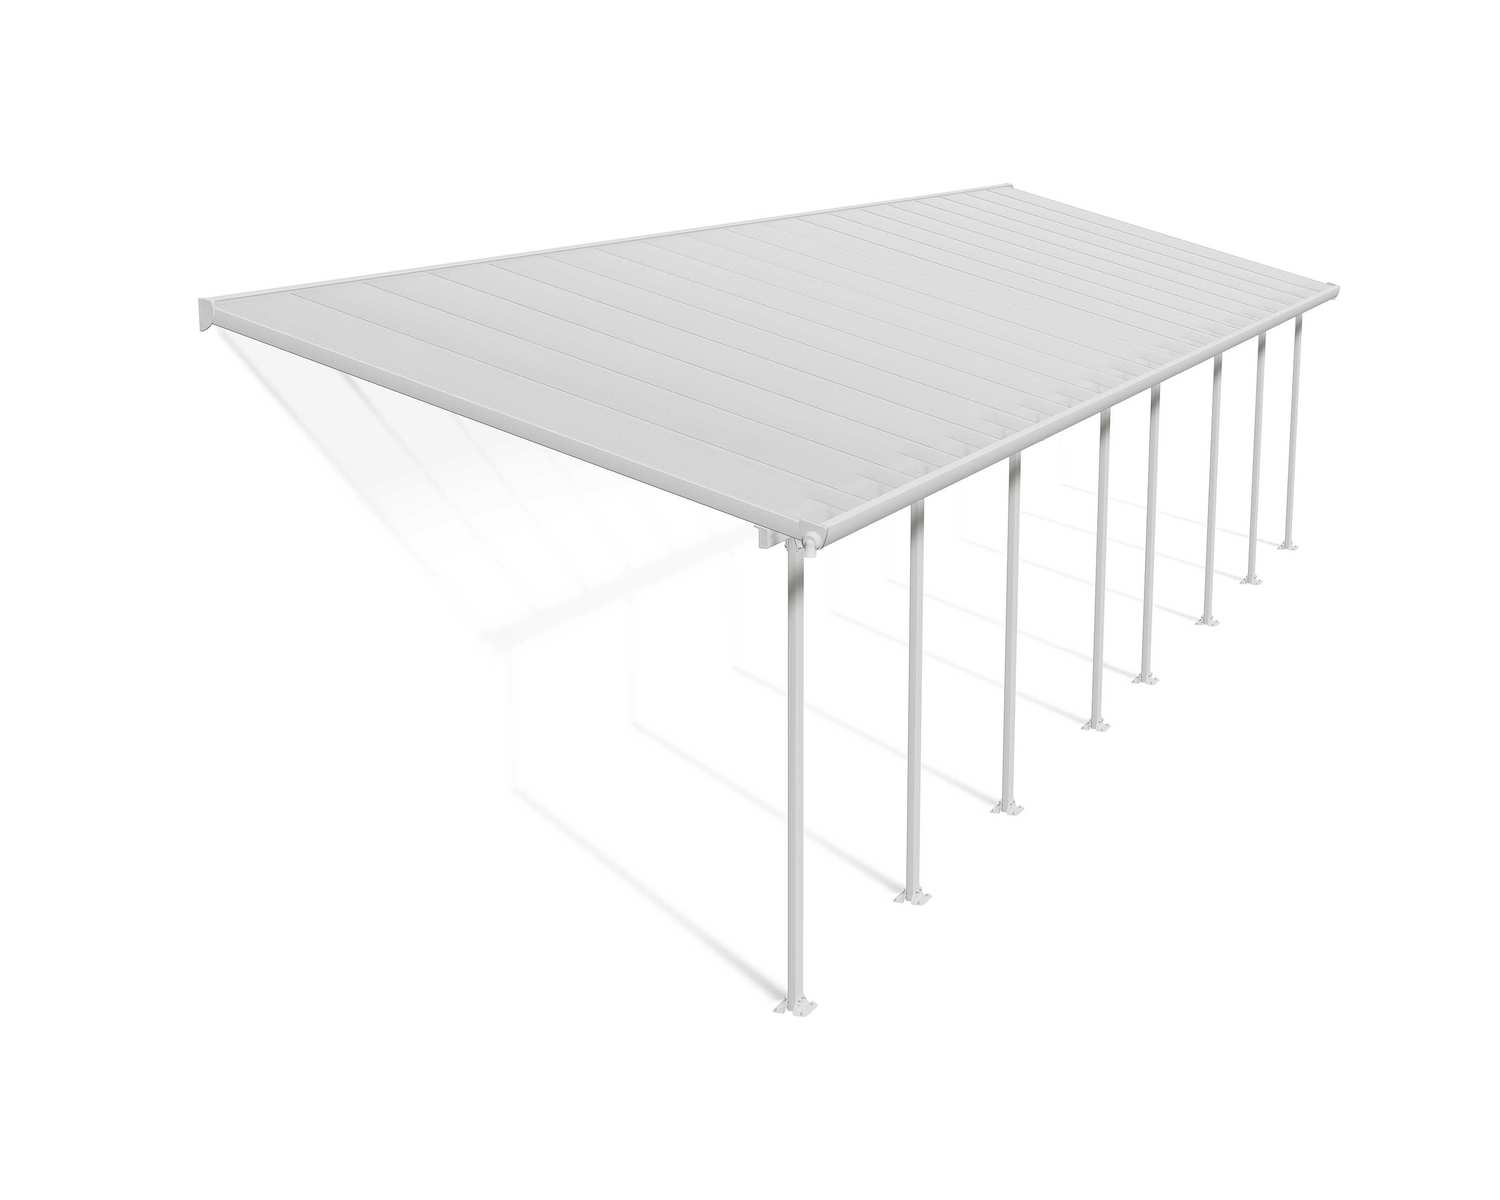 Feria 10 ft. x 34 ft. White Aluminium Patio Cover With 8 Posts, Clear Twin-Wall Polycarbonate Roof Panels.